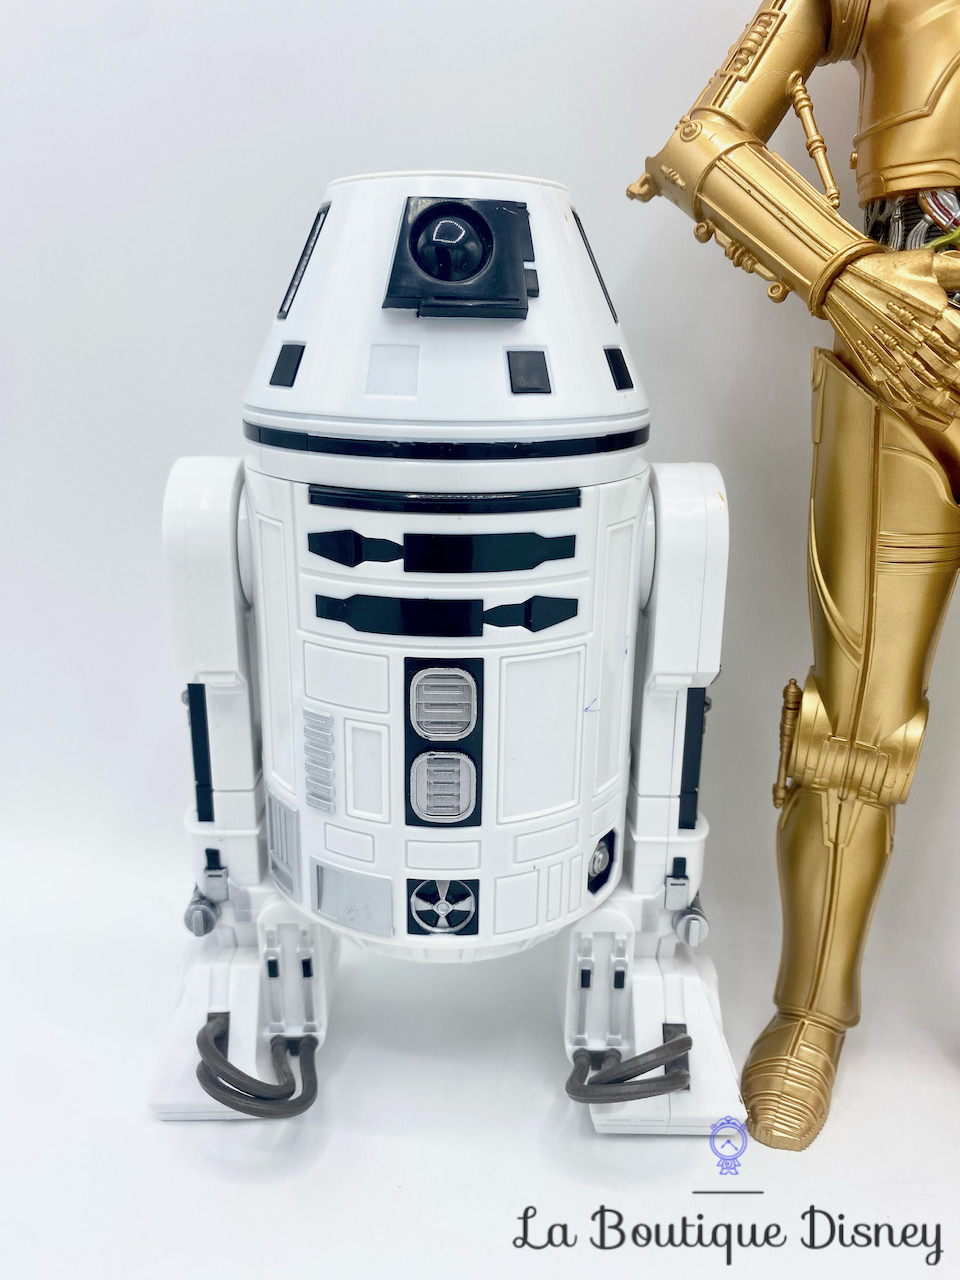 figurines-star-wJouet Figurines Droid Pack Star Wars The Force Awakens Hasbro Disney 2015 C3PO BB8 RO4LO Special Collectors Editionars-the-force-awakens-droid-pack-3